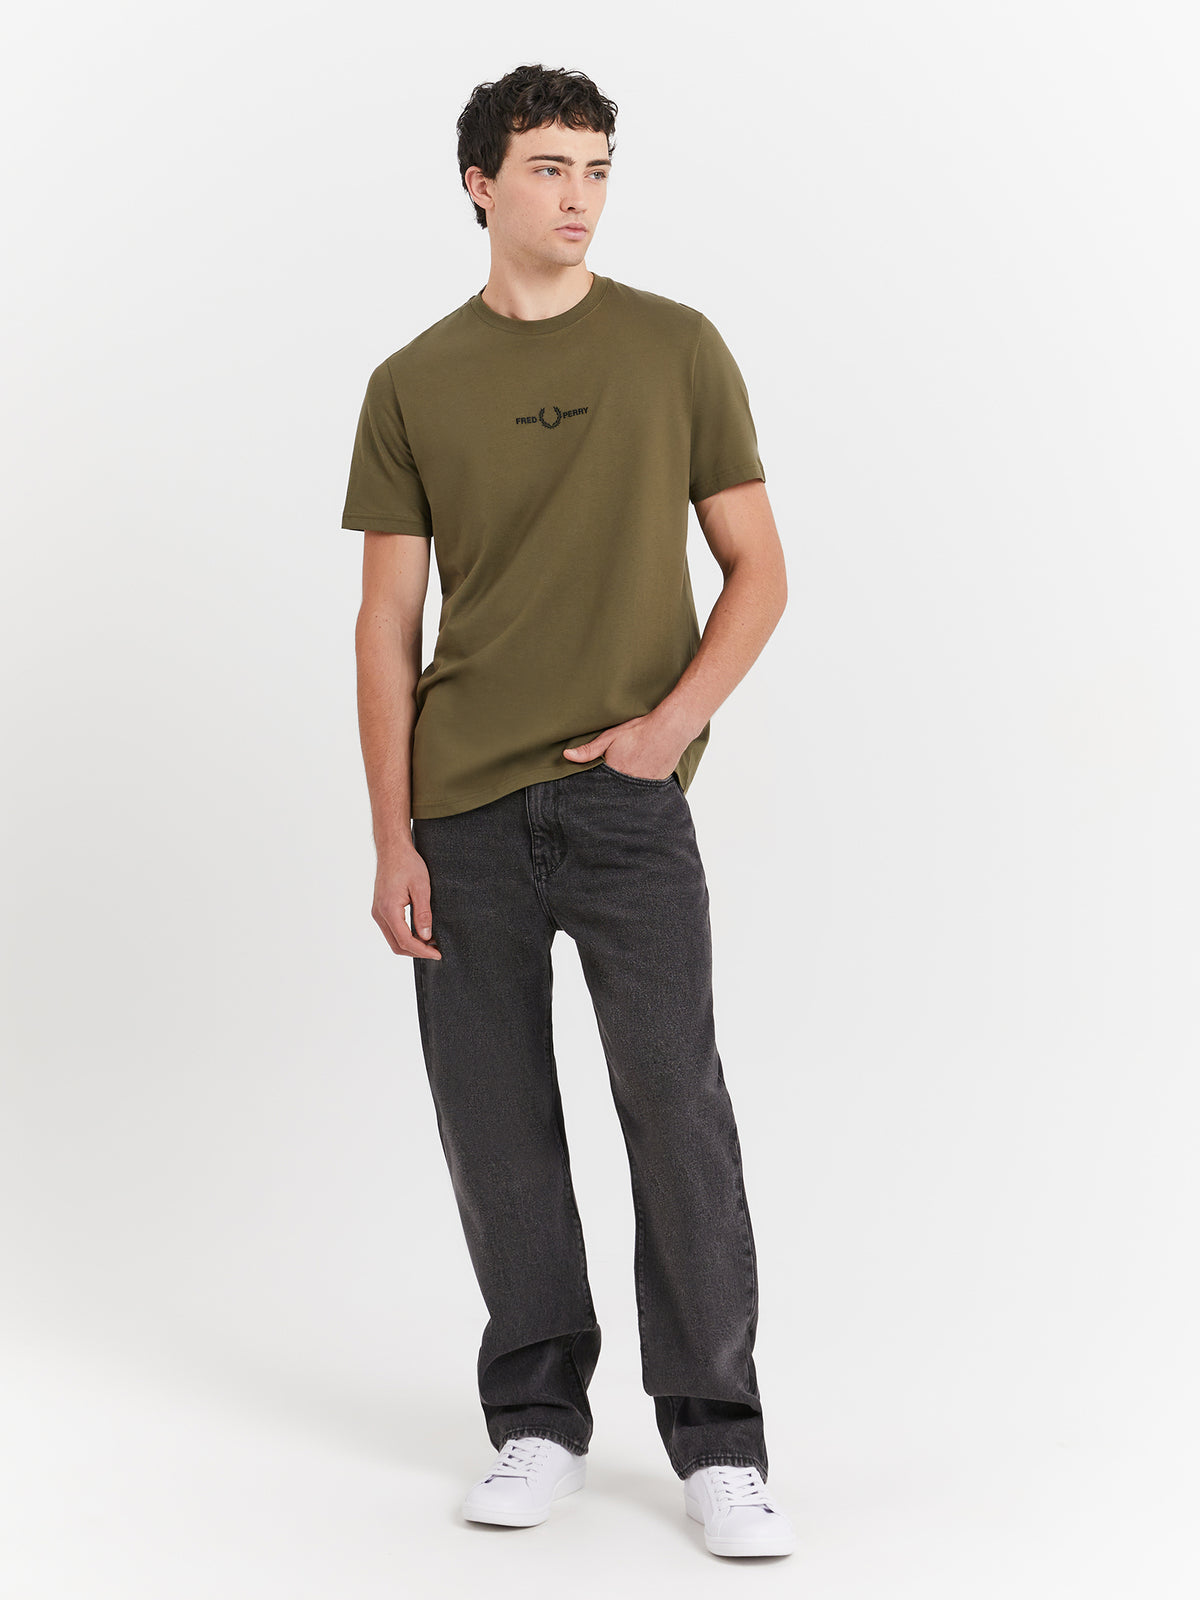 Embroidered T-Shirt in Uniform Green